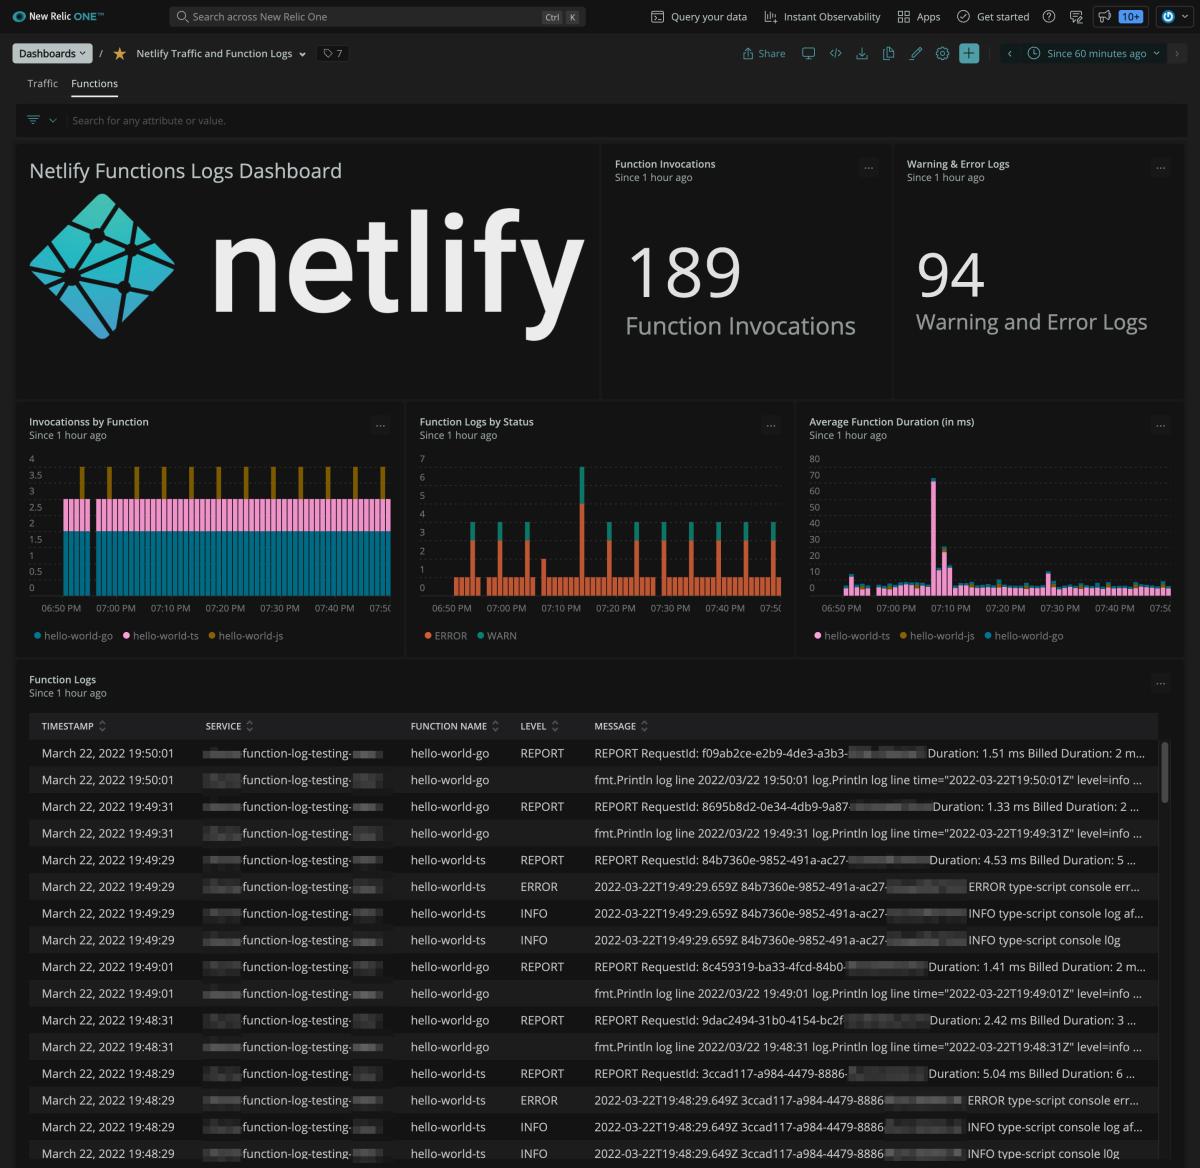 Dashboard shows Netlify Functions Logs